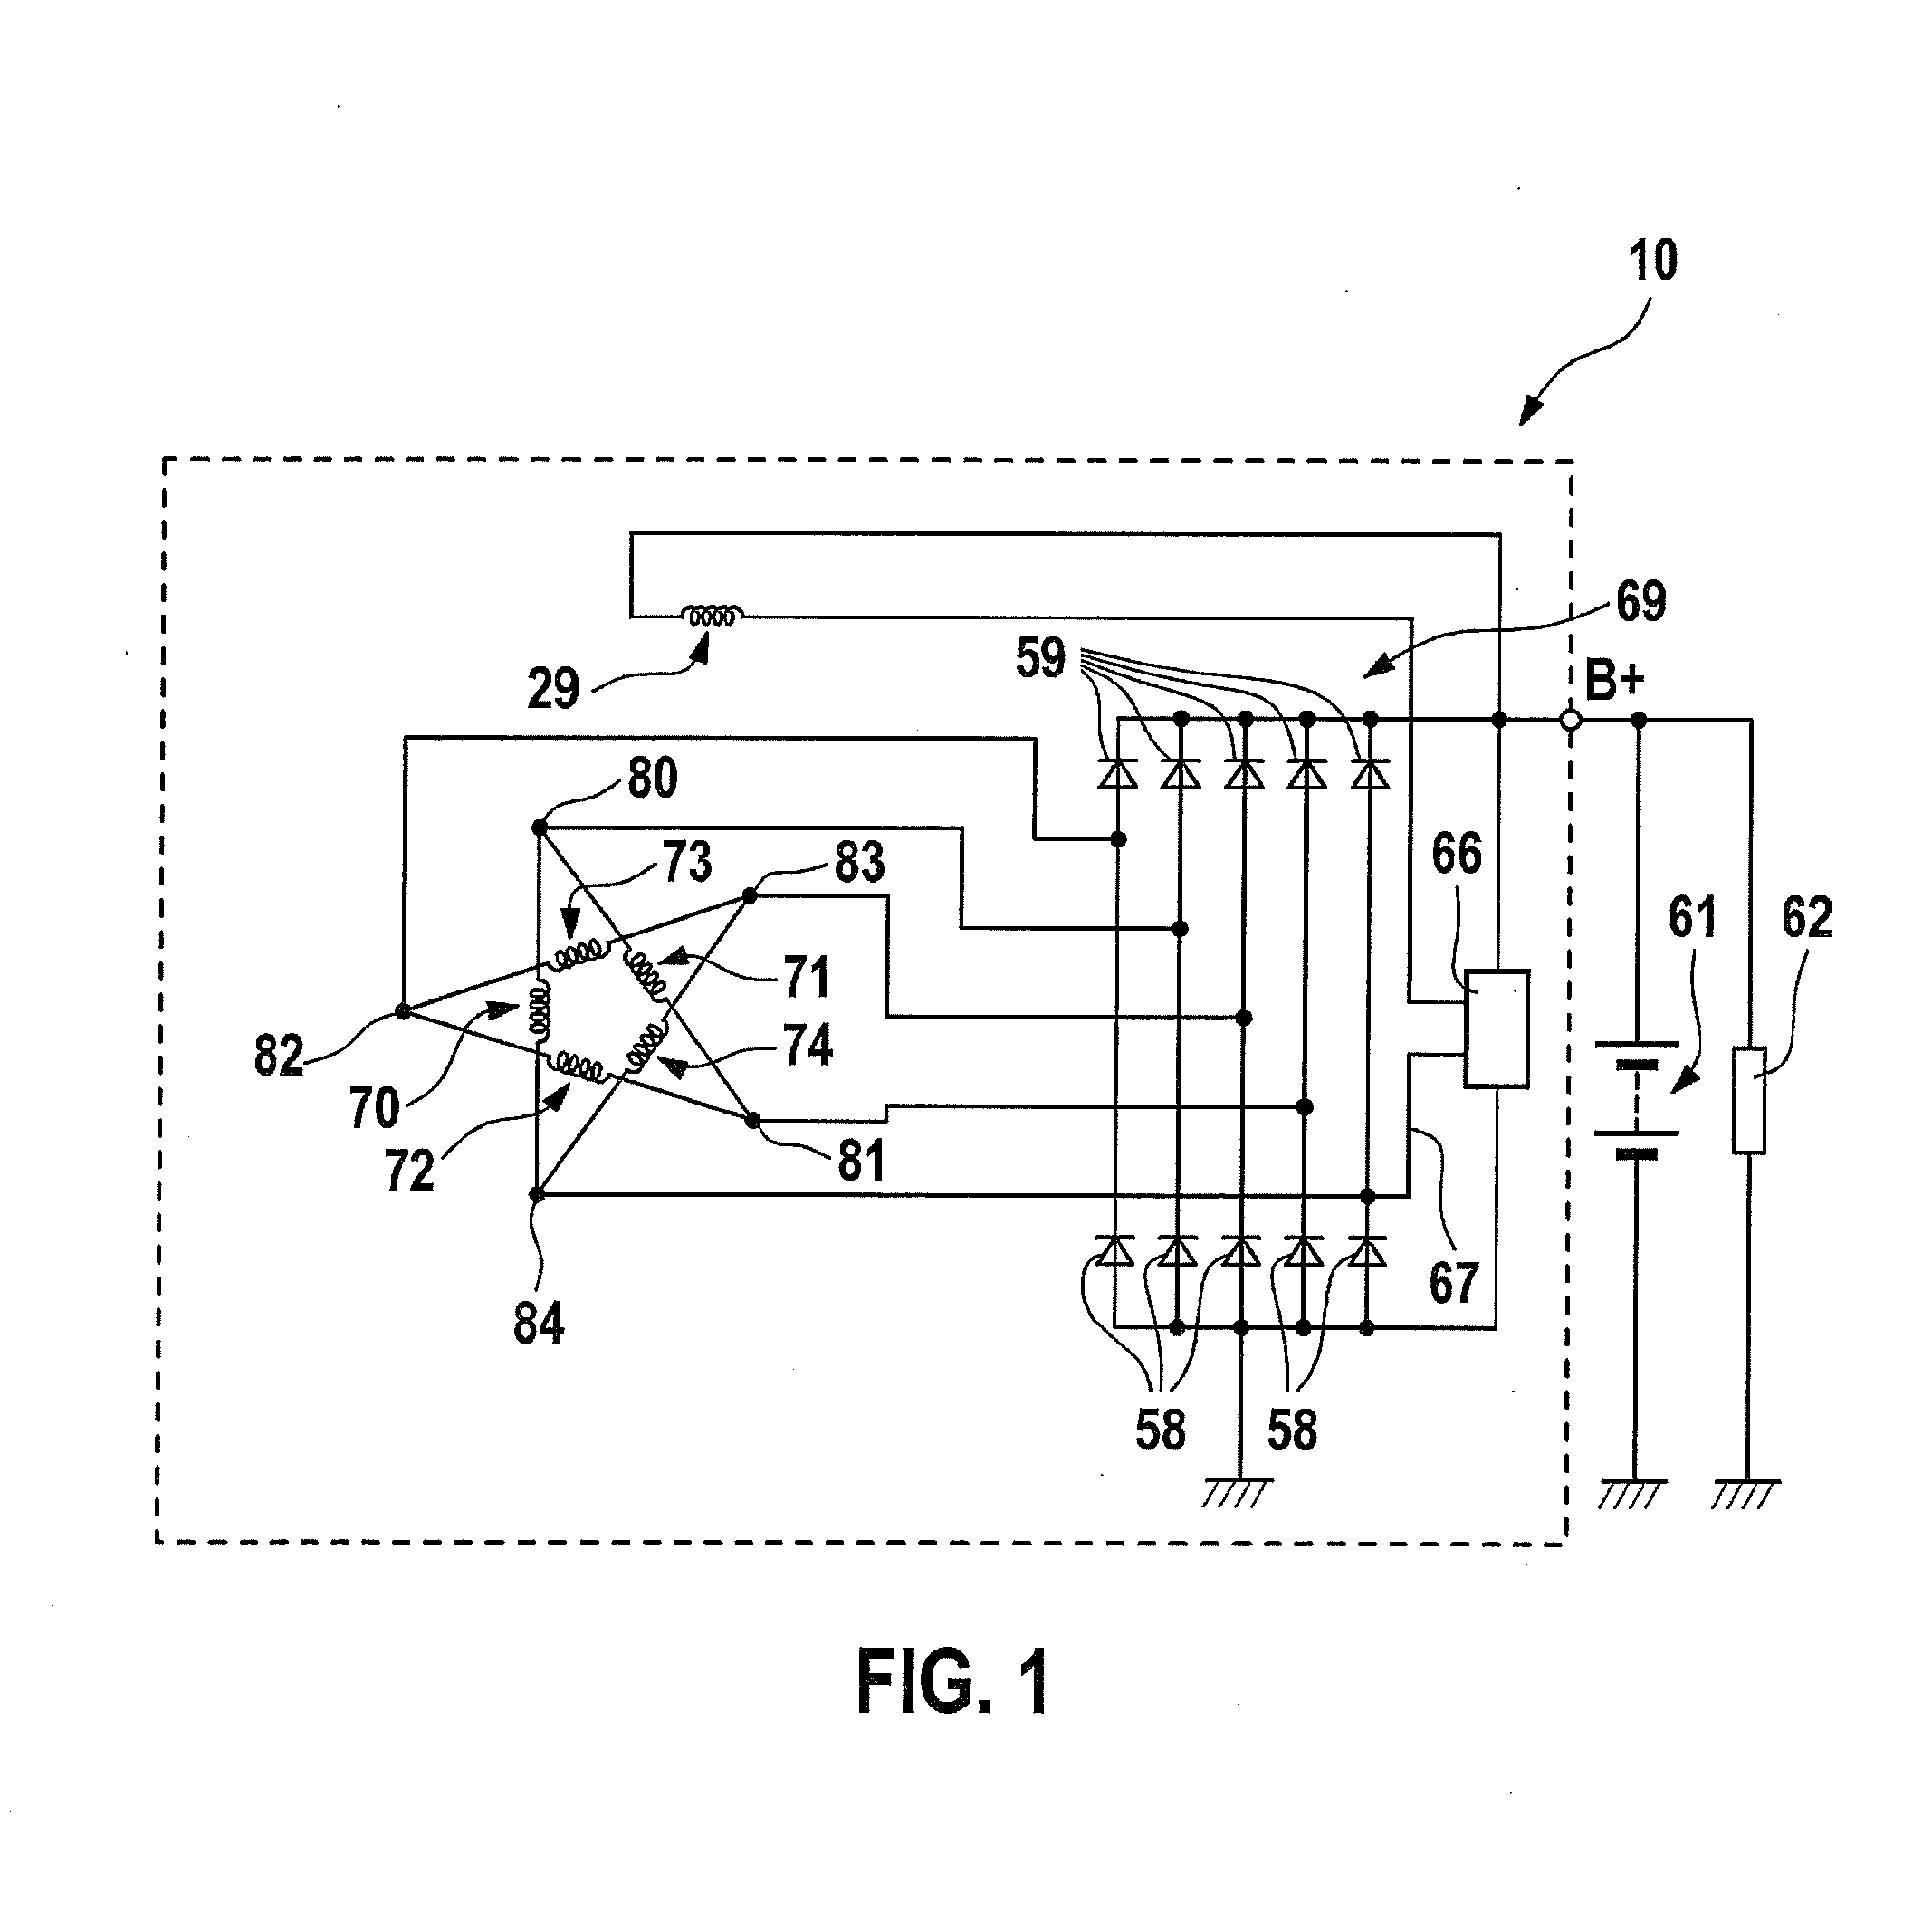 Power Supply Unit for a Vehicle Electrical System of a Motor Vehicle